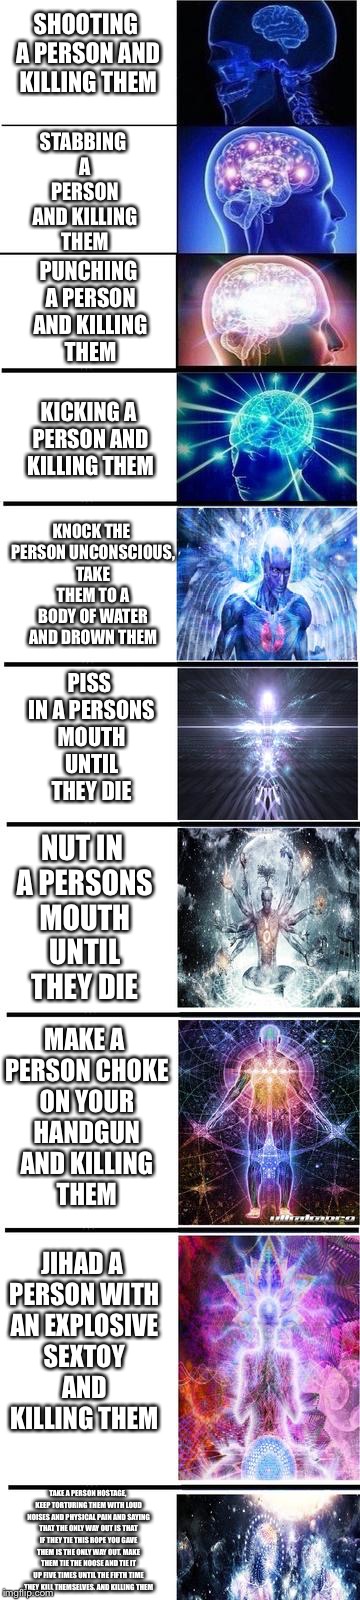 expanding brain | SHOOTING A PERSON AND KILLING THEM; STABBING A PERSON AND KILLING THEM; PUNCHING A PERSON AND KILLING THEM; KICKING A PERSON AND KILLING THEM; KNOCK THE PERSON UNCONSCIOUS, TAKE THEM TO A BODY OF WATER AND DROWN THEM; PISS IN A PERSONS MOUTH UNTIL THEY DIE; NUT IN A PERSONS MOUTH UNTIL THEY DIE; MAKE A PERSON CHOKE ON YOUR HANDGUN AND KILLING THEM; JIHAD A PERSON WITH AN EXPLOSIVE SEXTOY AND KILLING THEM; TAKE A PERSON HOSTAGE, KEEP TORTURING THEM WITH LOUD NOISES AND PHYSICAL PAIN AND SAYING THAT THE ONLY WAY OUT IS THAT IF THEY TIE THIS ROPE YOU GAVE THEM IS THE ONLY WAY OUT. MAKE THEM TIE THE NOOSE AND TIE IT UP FIVE TIMES UNTIL THE FIFTH TIME THEY KILL THEMSELVES. AND KILLING THEM | image tagged in expanding brain | made w/ Imgflip meme maker